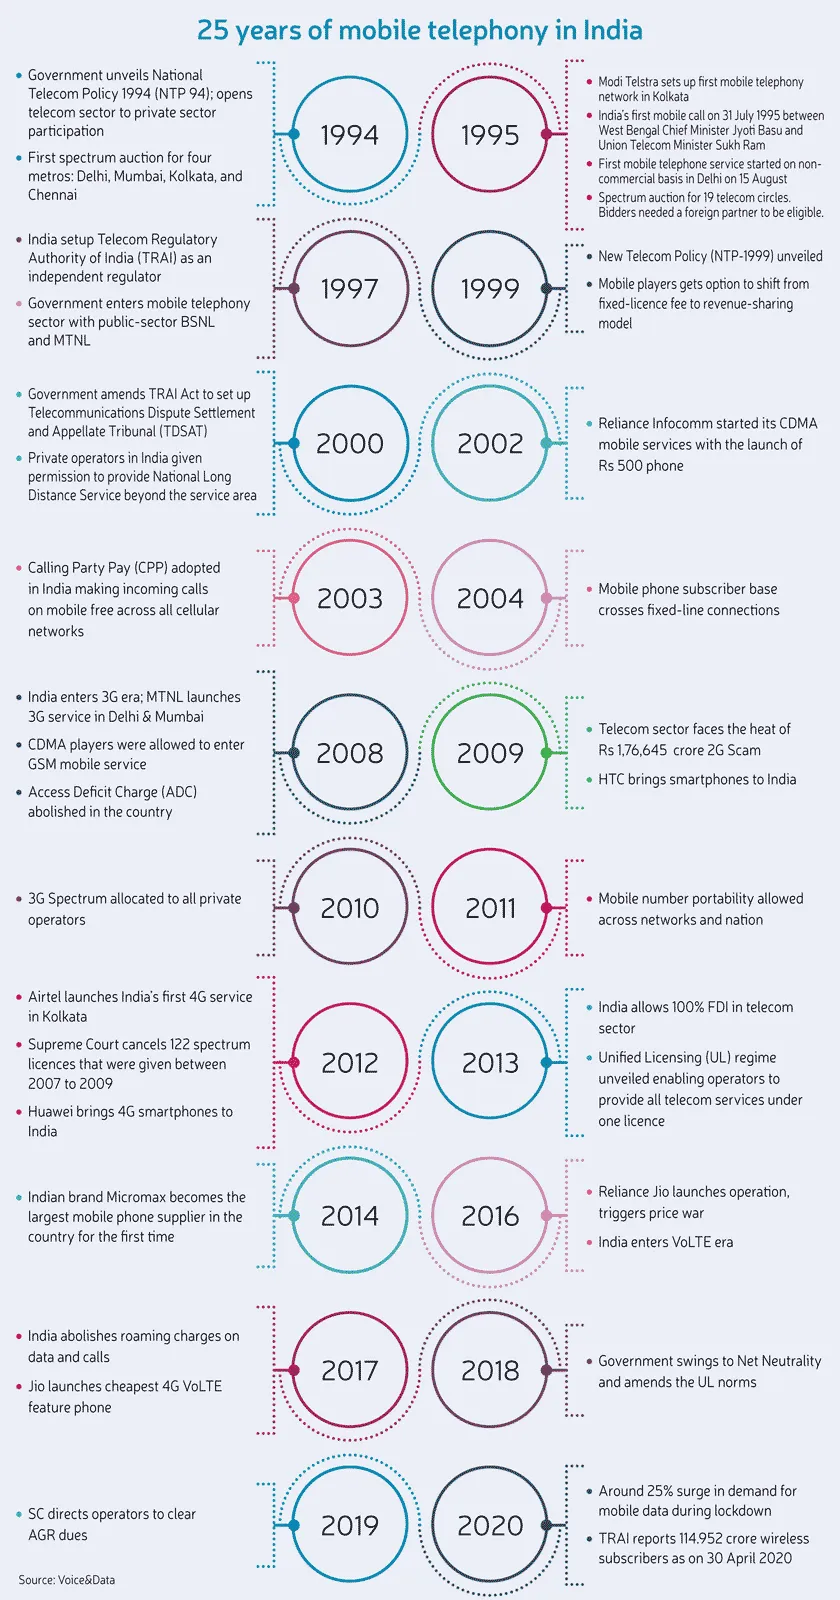 25 Years of Mobile Telephony in India